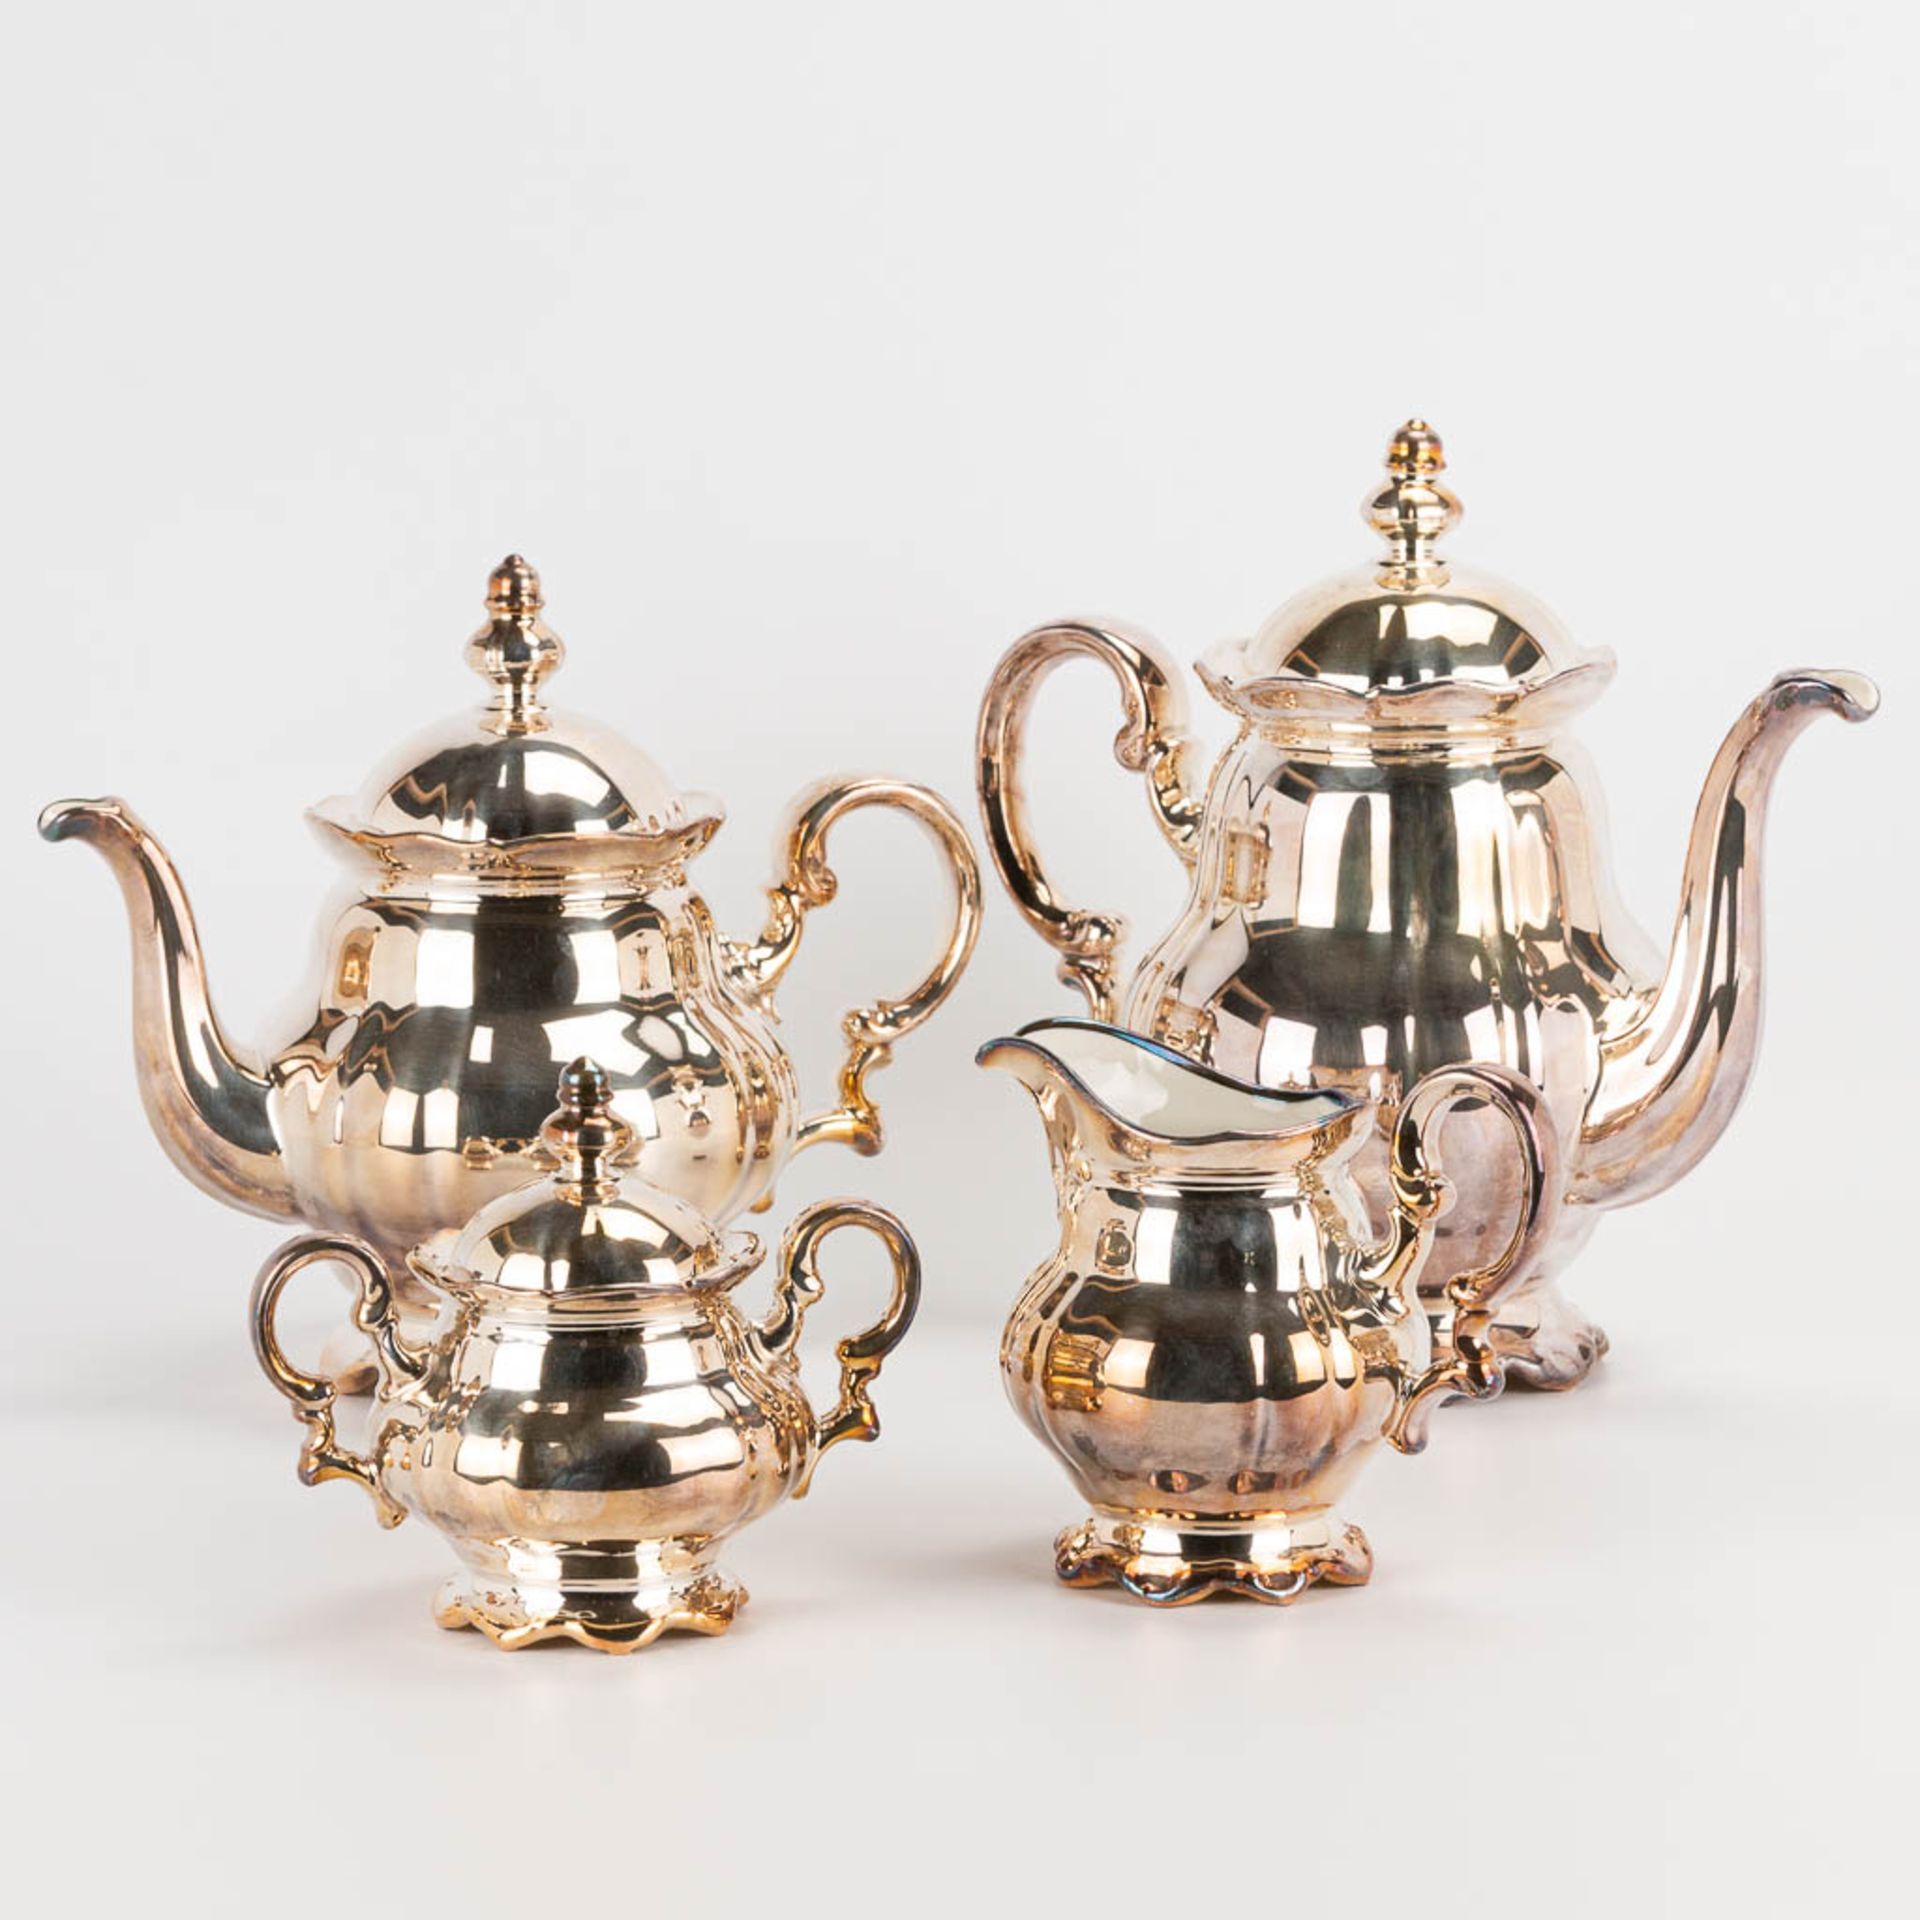 A coffee and tea service made of silver-plated porcelain. Not marked. (13 x 28 x 25 cm)